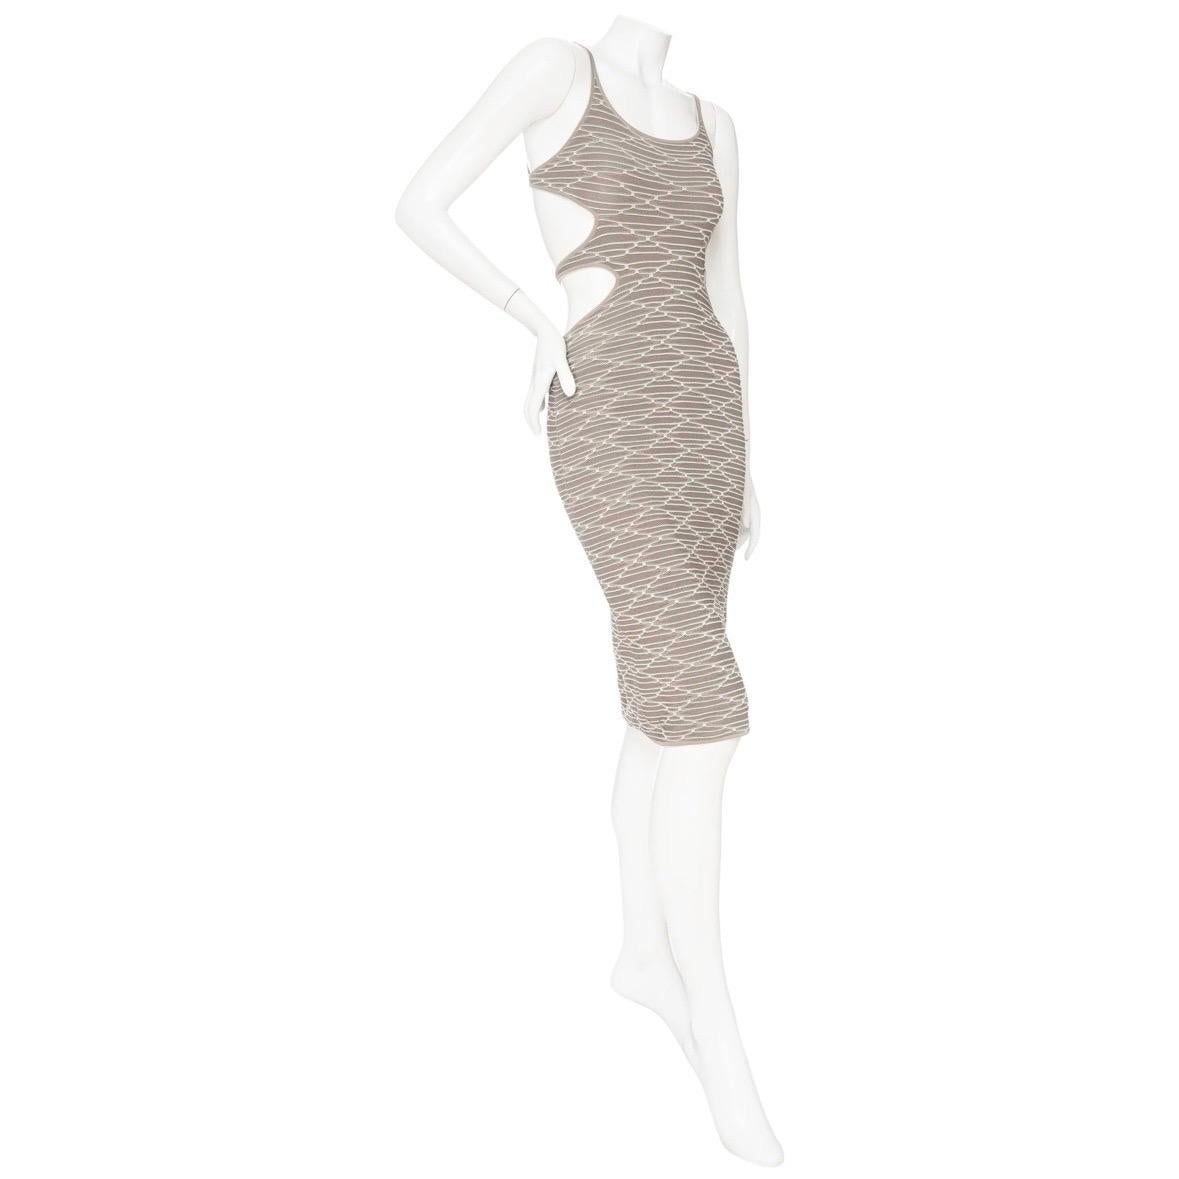 Hervé Léger Brown Patterned Cutout Bodycon Dress 

Brown/Light Blue
Stretch-knit
Textured patterning
Sleeveless
Scoop neckline
Side cutouts
Thin spaghetti straps
Open back
Bodycon silhouette
Knee-length
Made in Italy
98% viscose, 2% spandex
Very